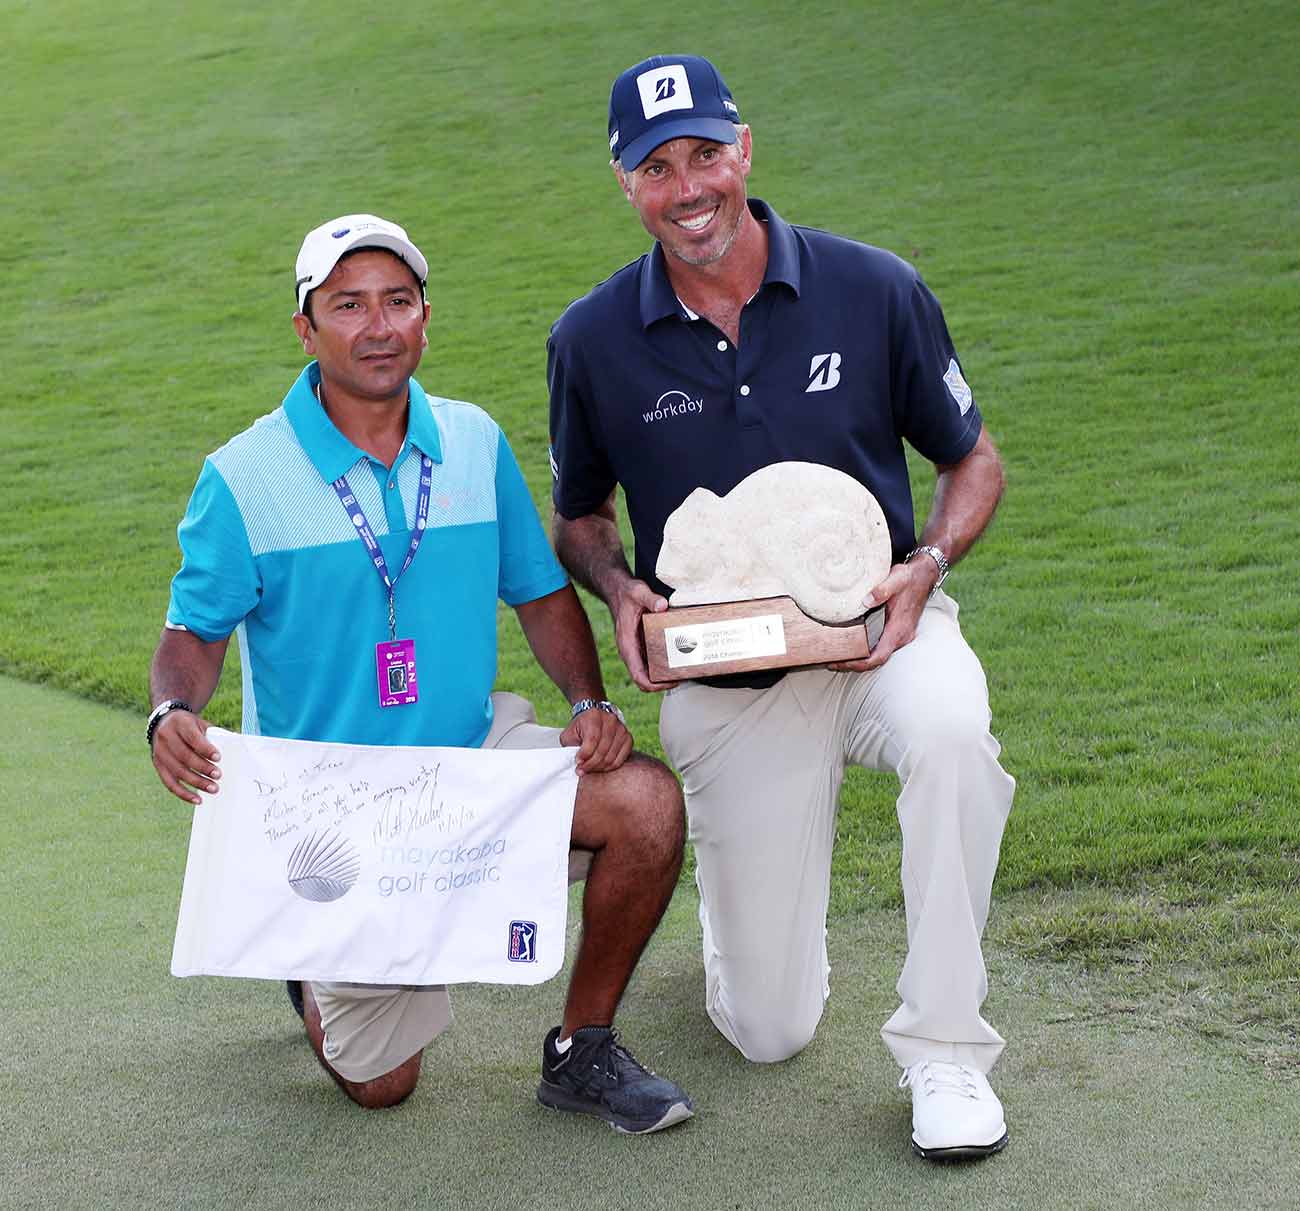 Matt Kuchar and El Tucan pose for a photo after their win. El Tucan said he cried when he held the trophy.